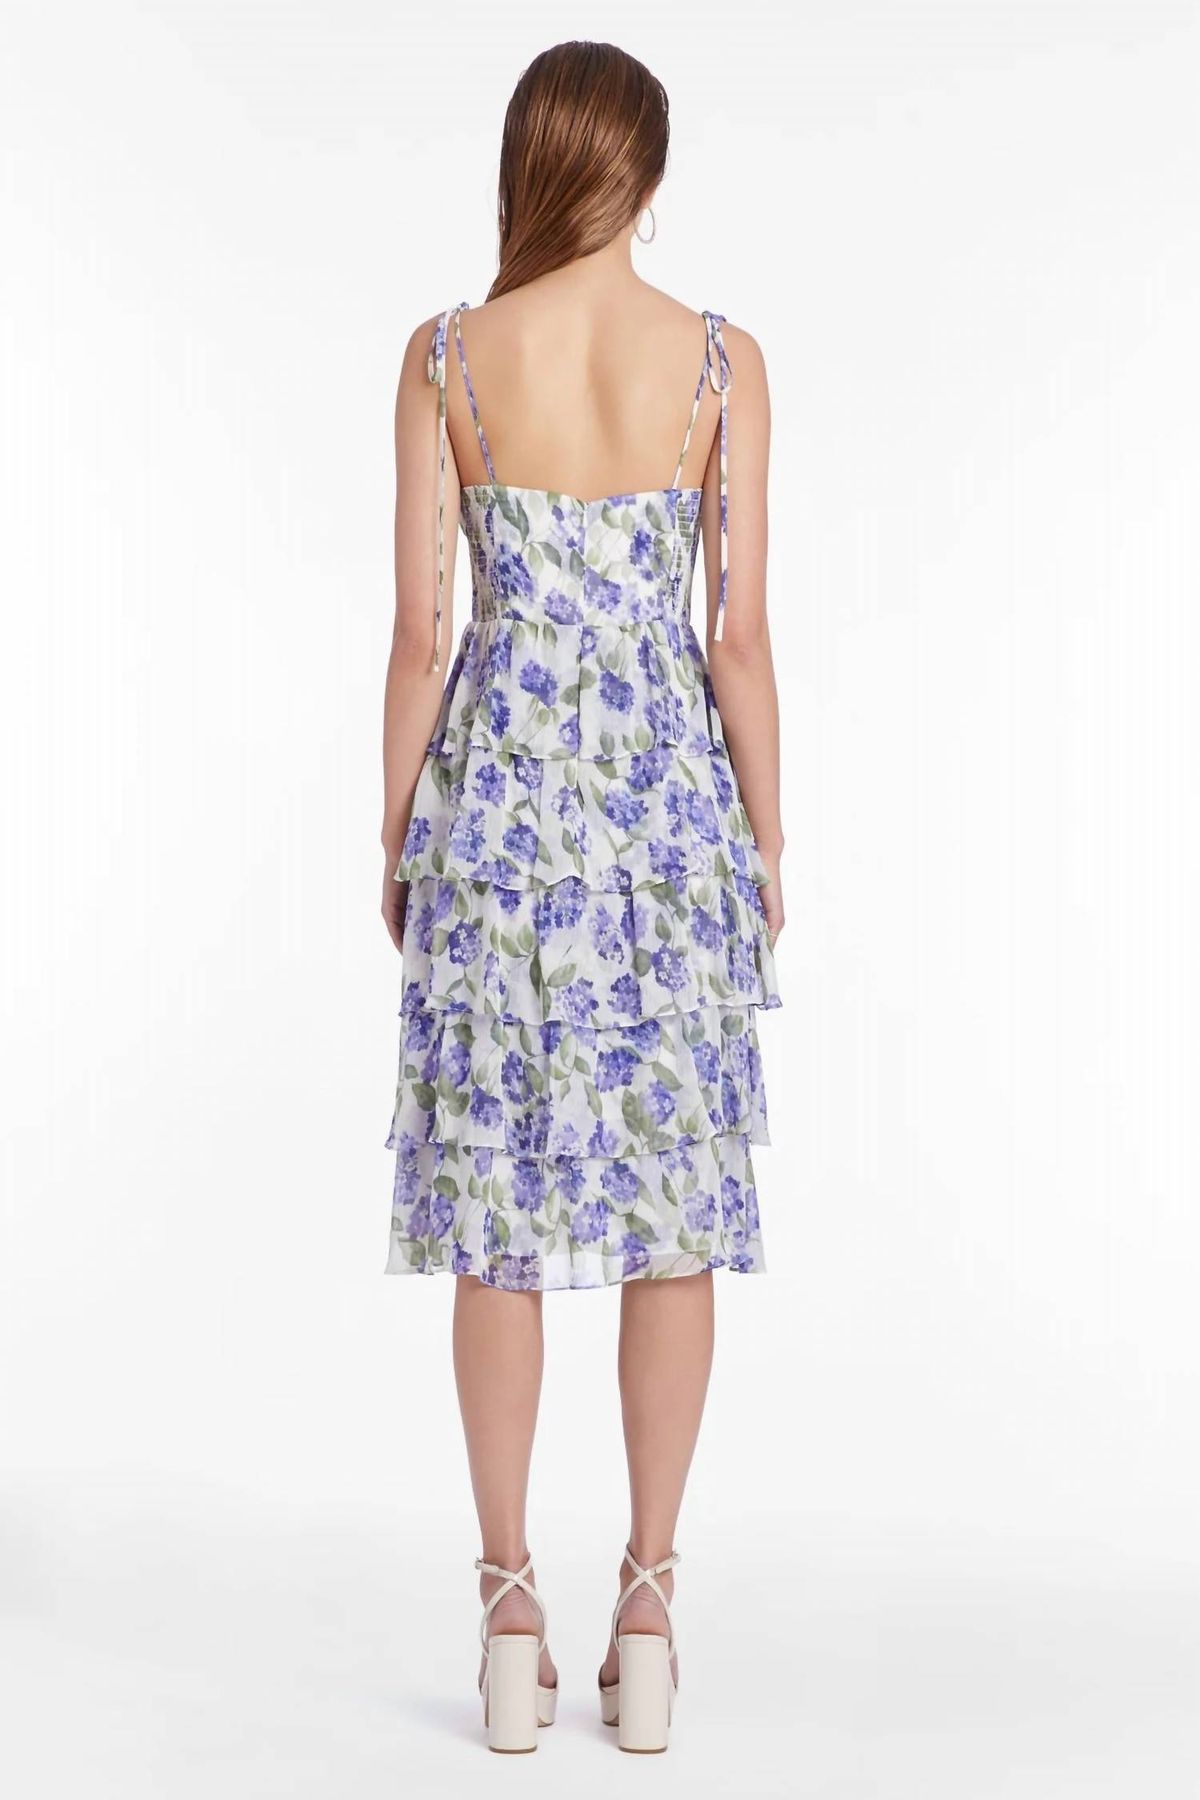 Style 1-3495318371-2696 Amanda Uprichard Size L Floral Purple Cocktail Dress on Queenly